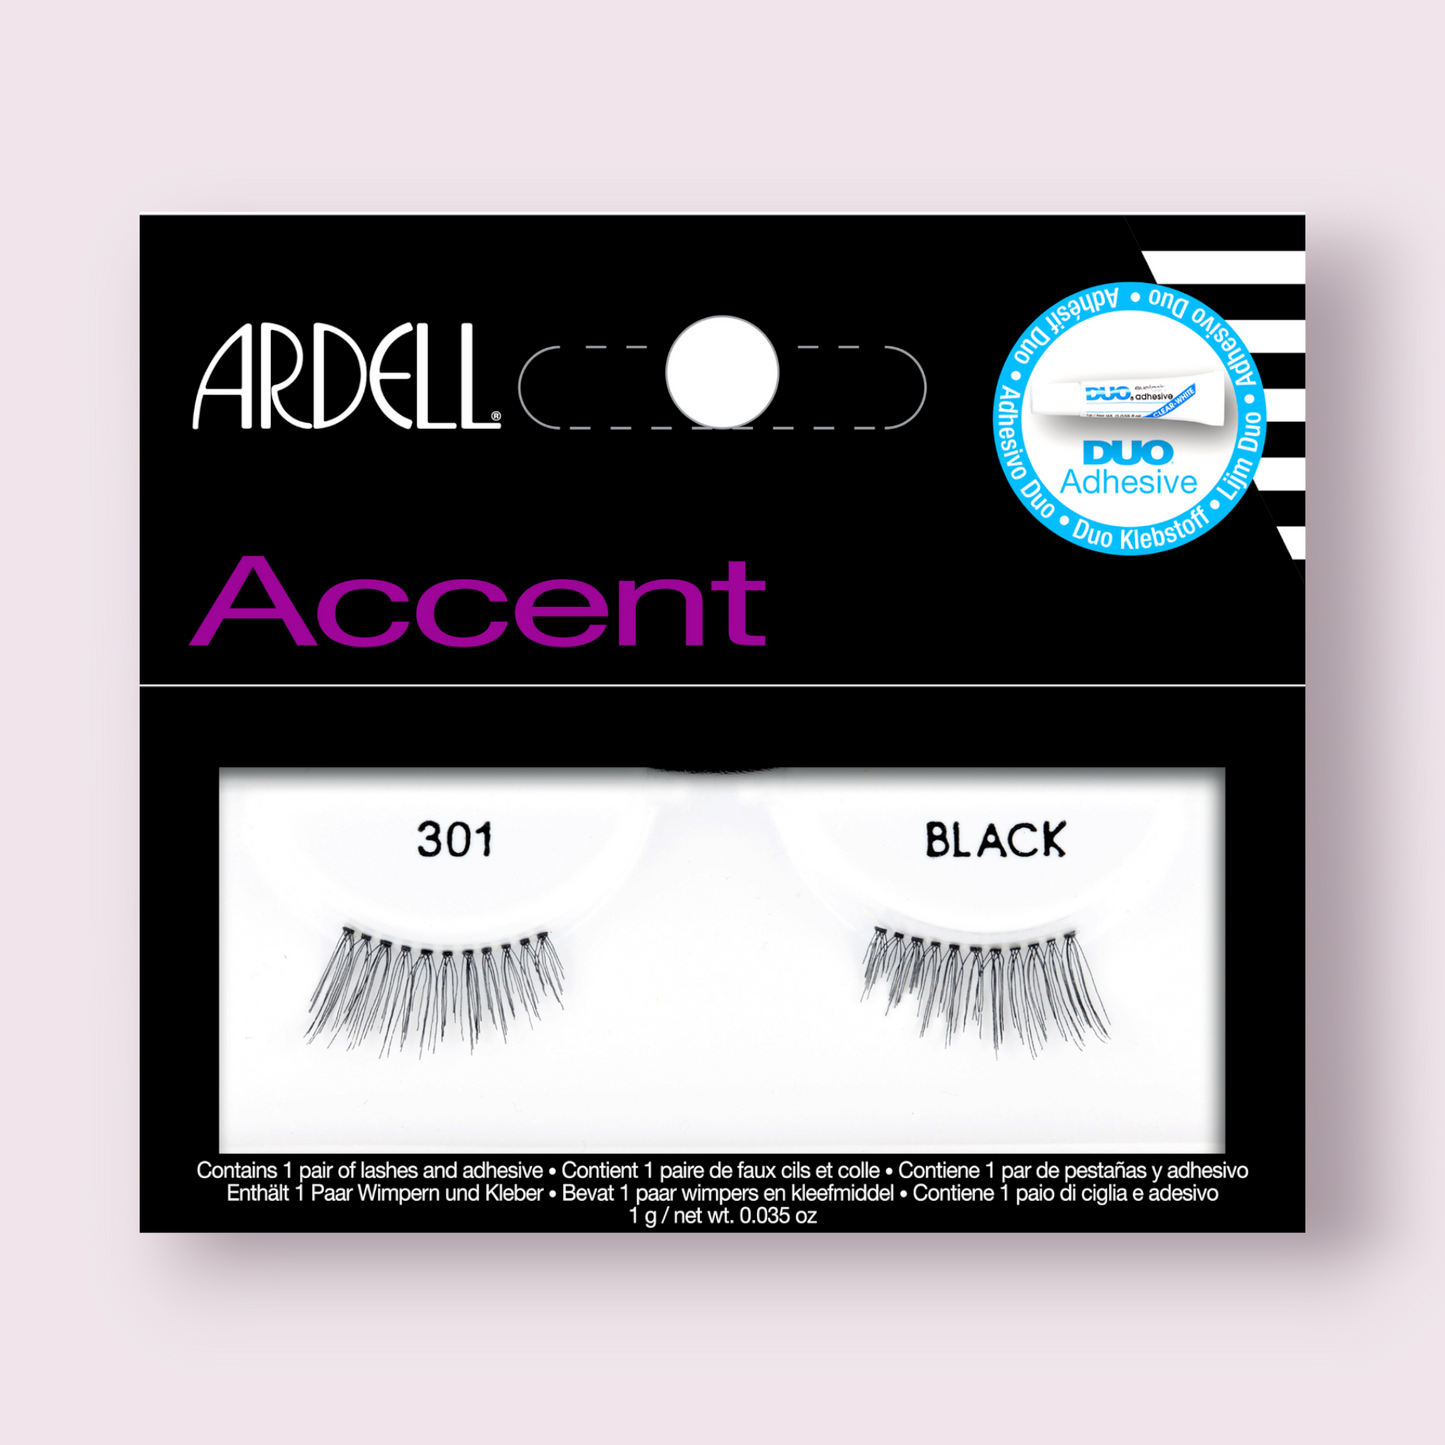 ARDELL - ACCENT 301